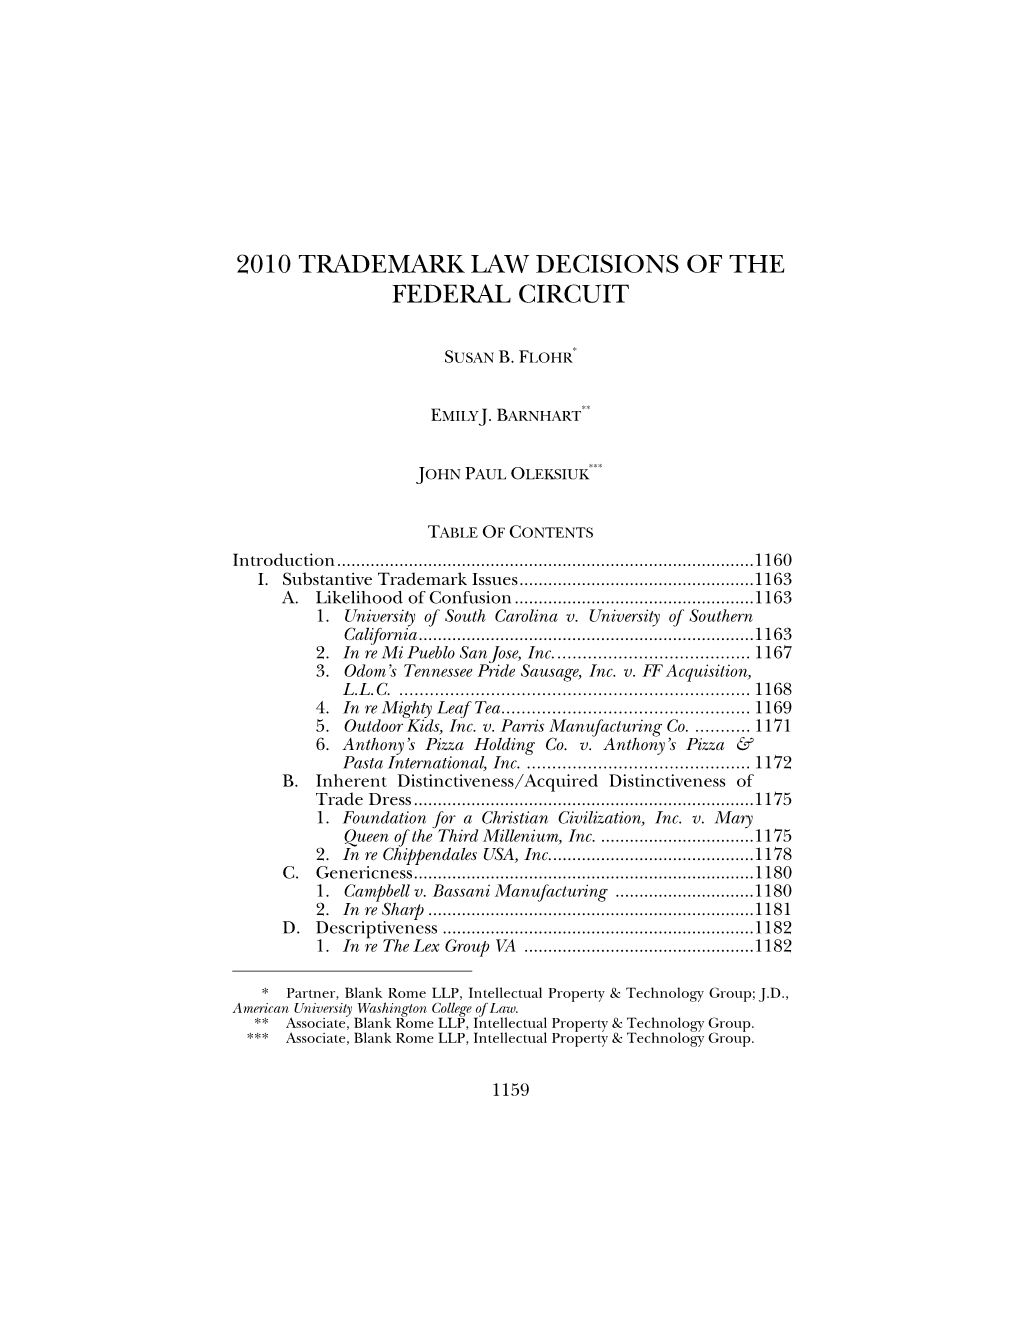 2010 Trademark Law Decisions of the Federal Circuit